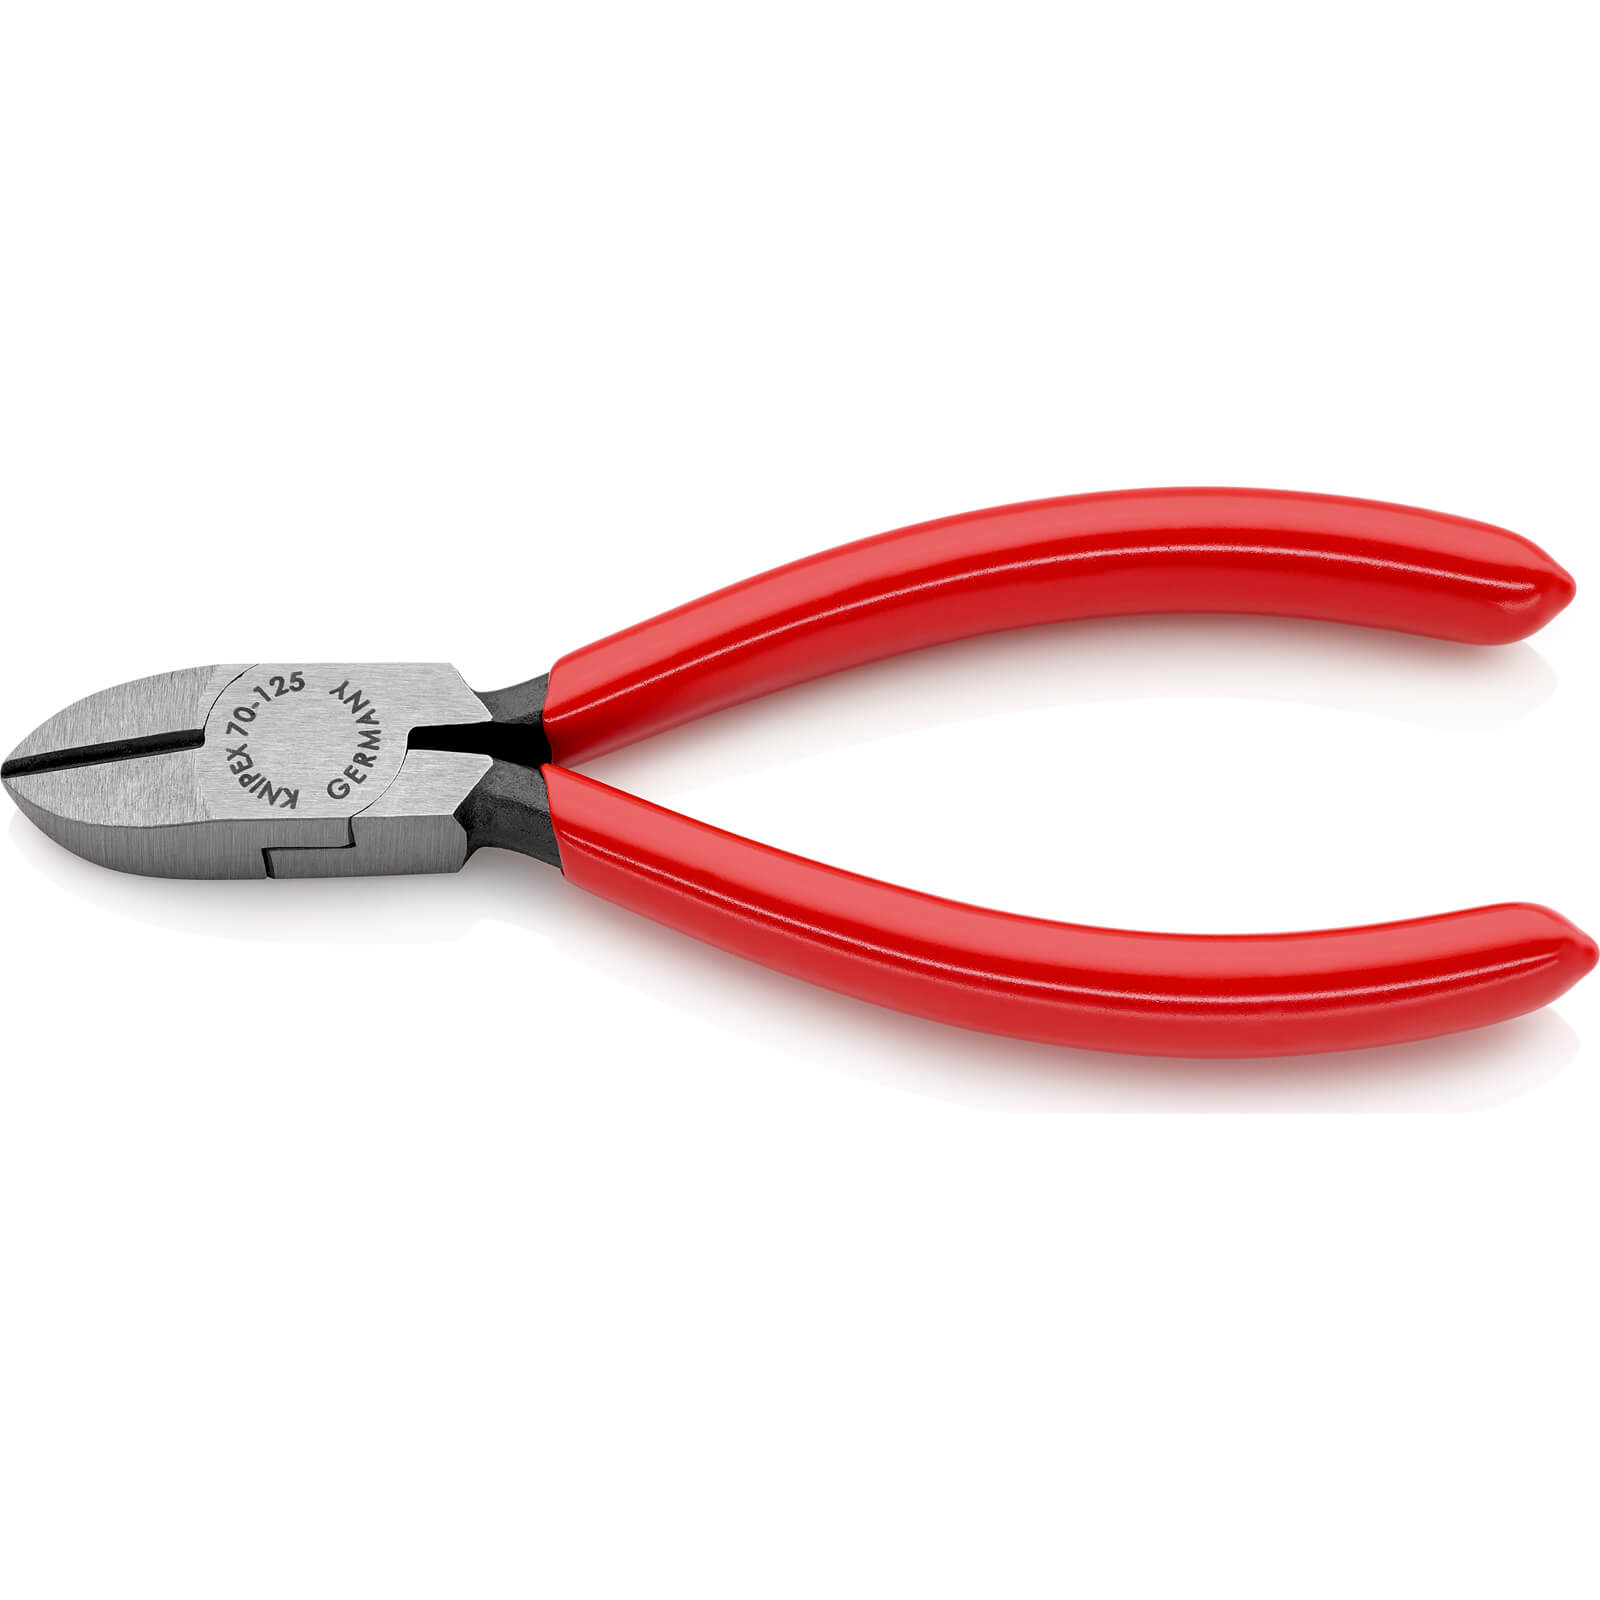 Image of Knipex 70 01 Diagonal Cutting Pliers 125mm